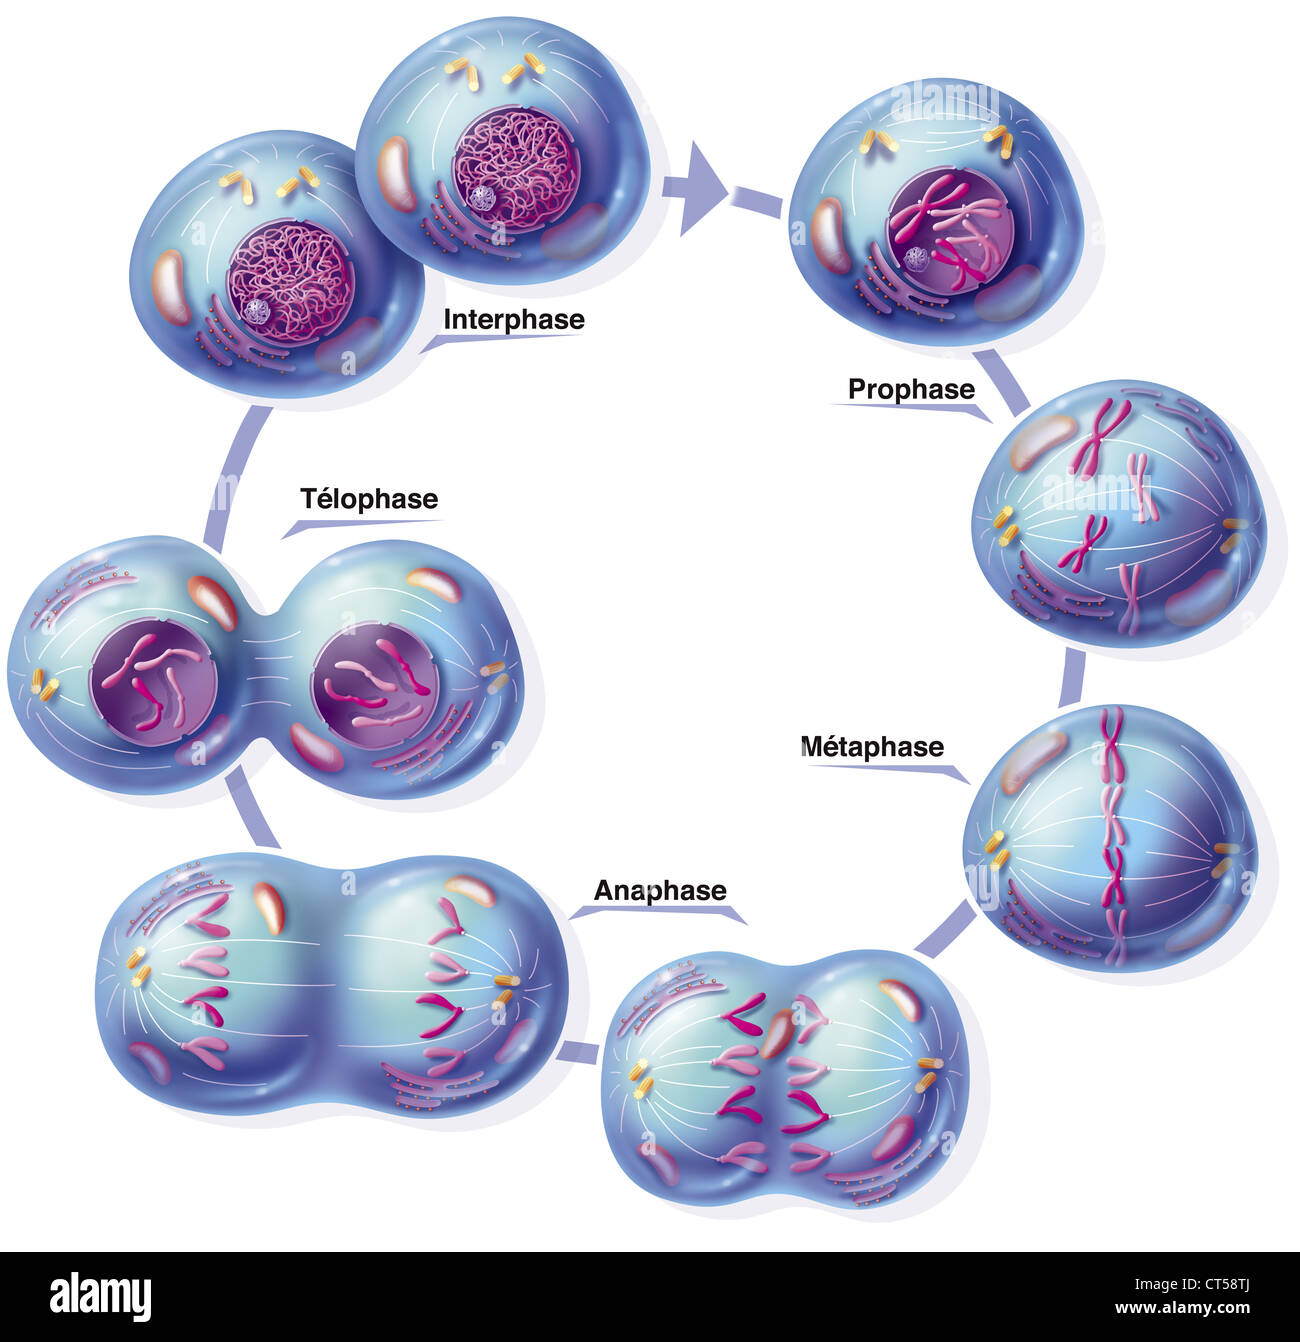 Stages Of Interphase Diagram